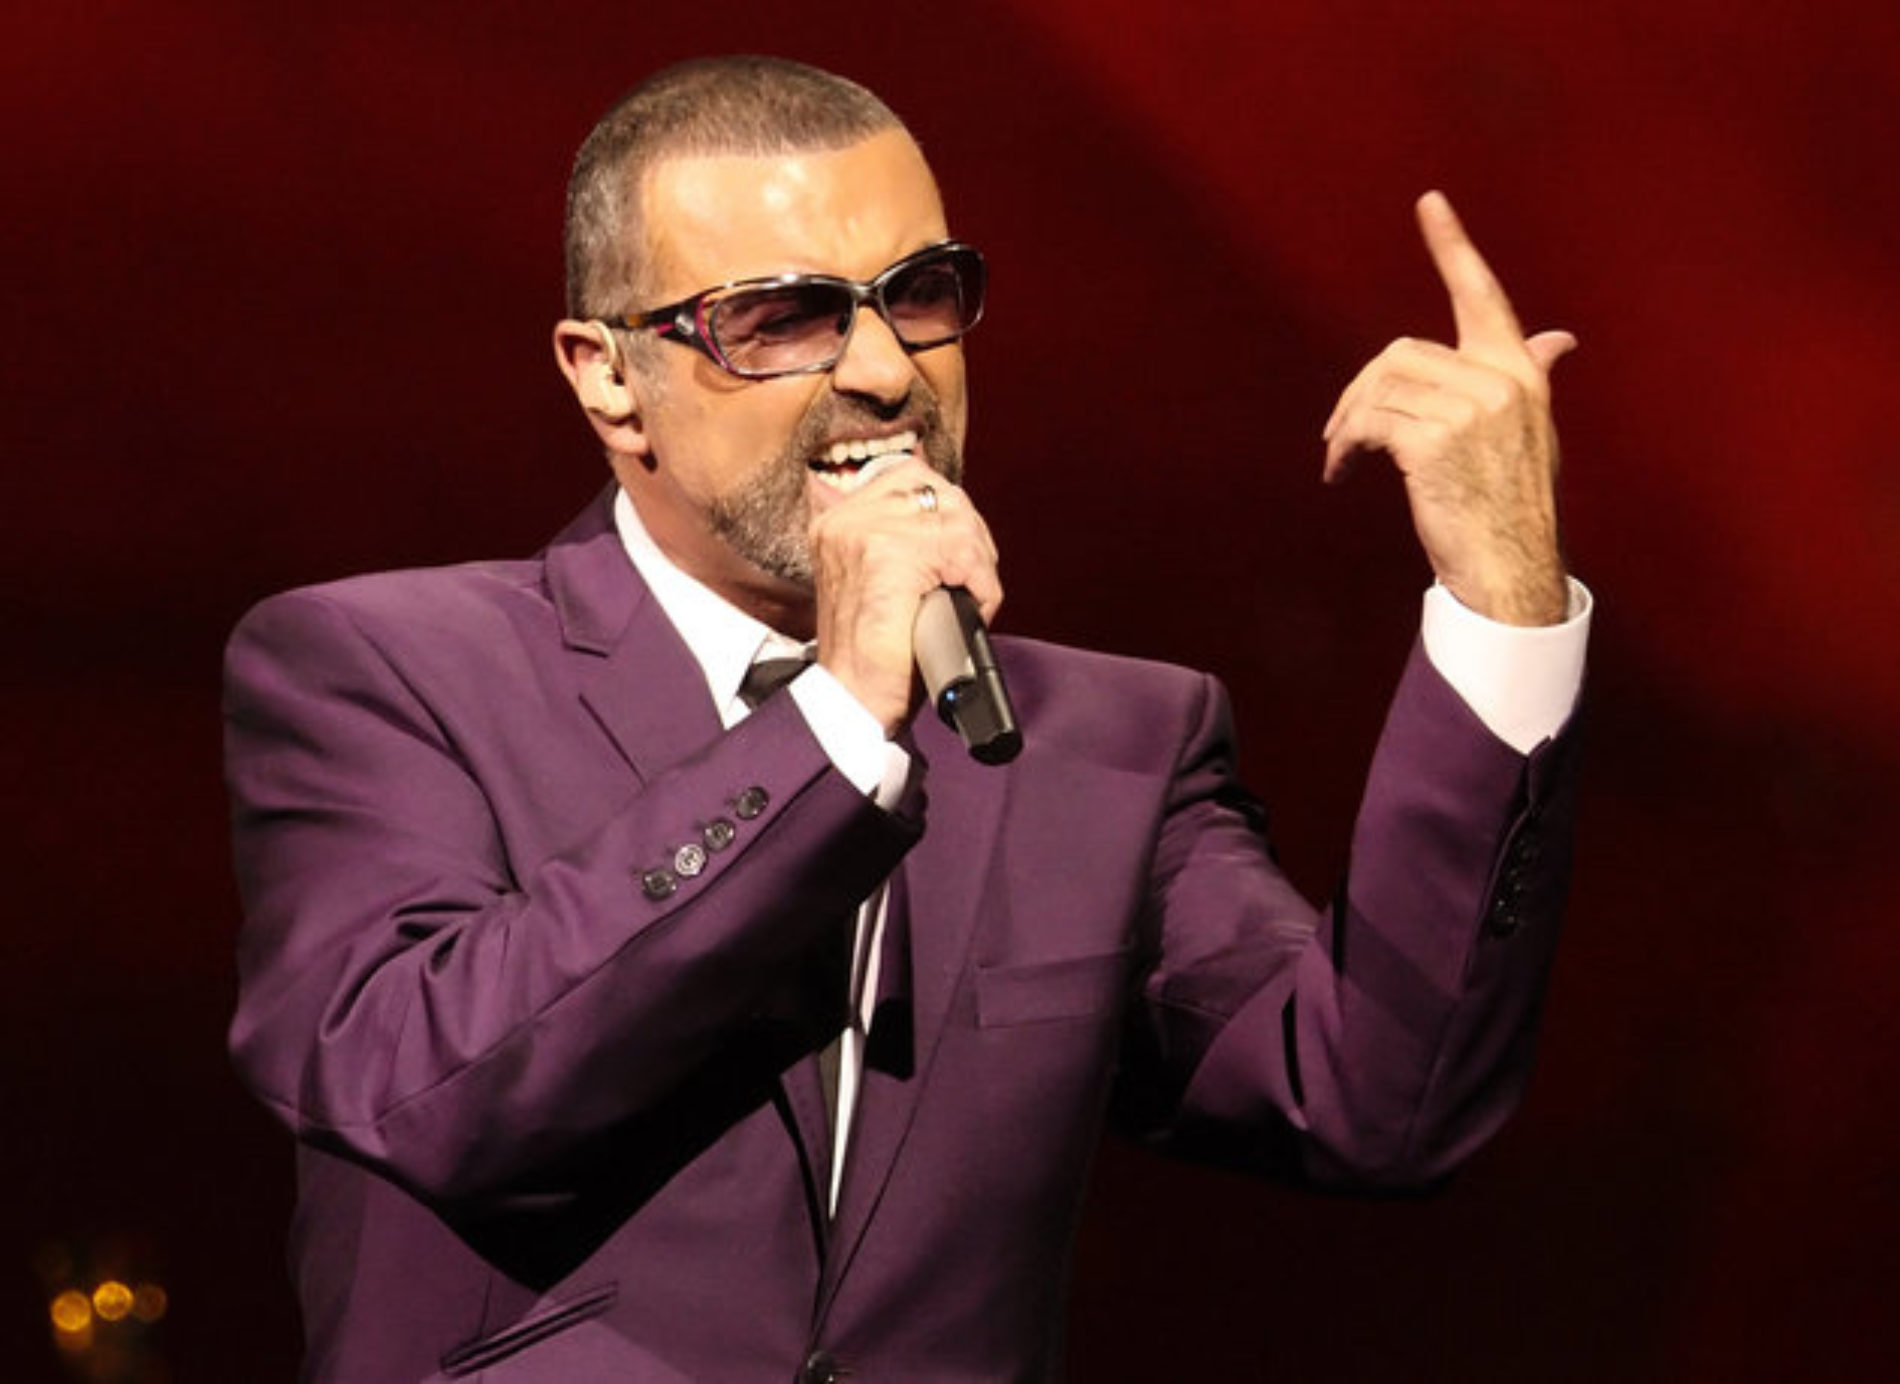 That Piece About How George Michael Should Be Honoured For The ‘Filthy Gay Fucker’ That He Was